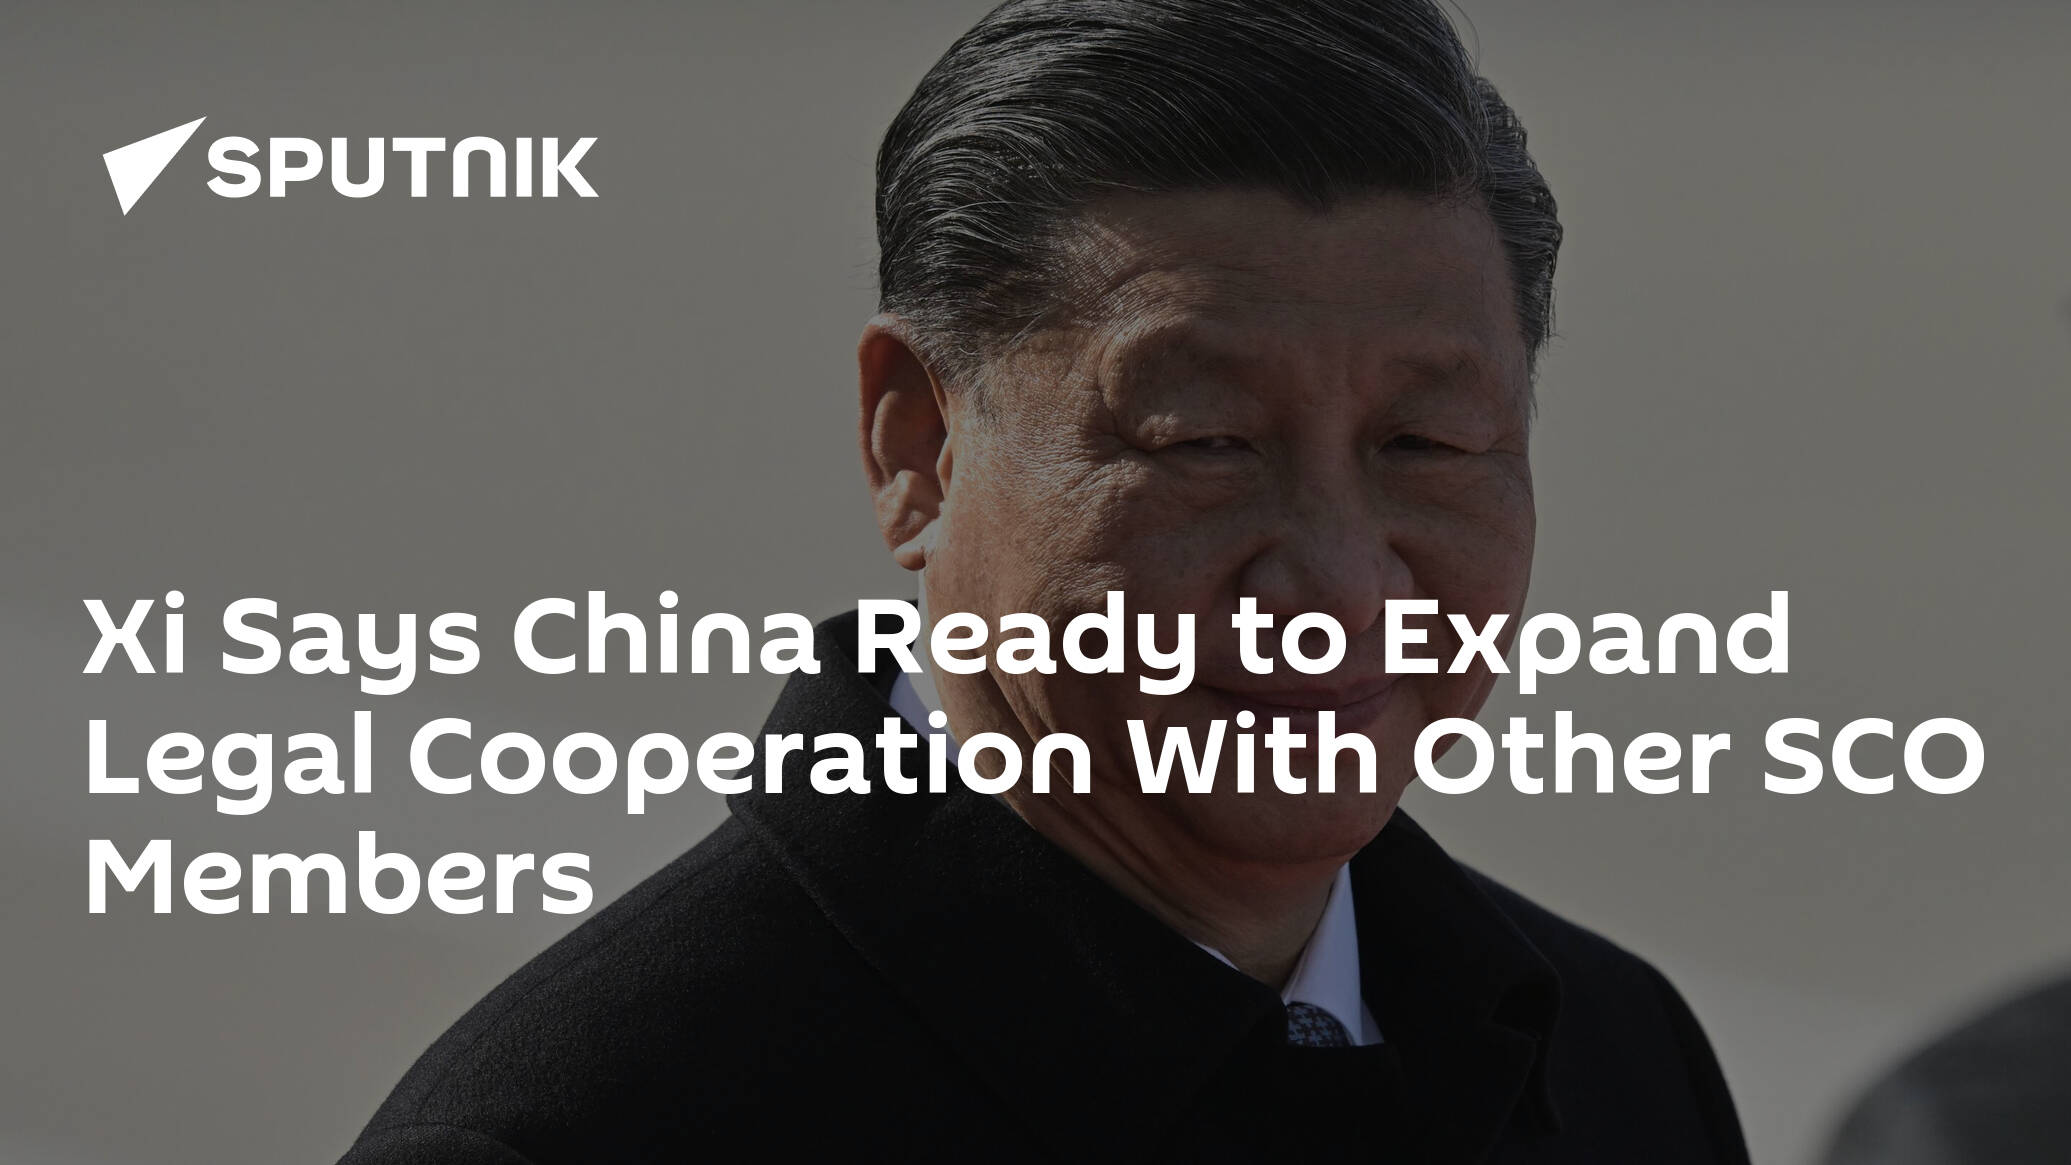 Xi Says China Ready to Expand Legal Cooperation With Other SCO Members